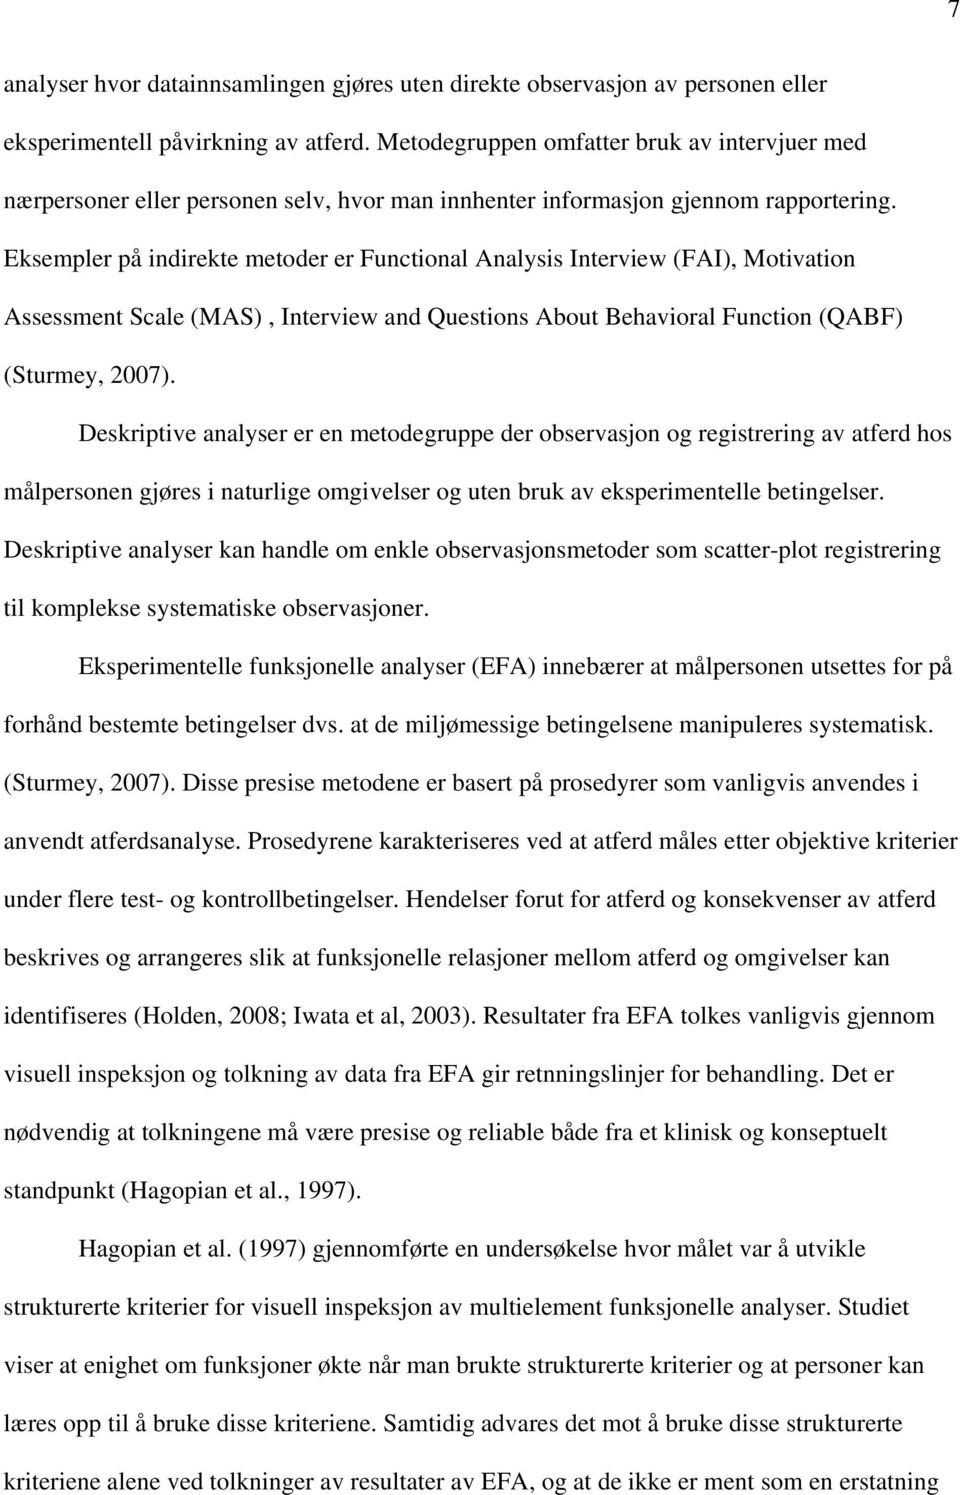 Eksempler på indirekte metoder er Functional Analysis Interview (FAI), Motivation Assessment Scale (MAS), Interview and Questions About Behavioral Function (QABF) (Sturmey, 2007).